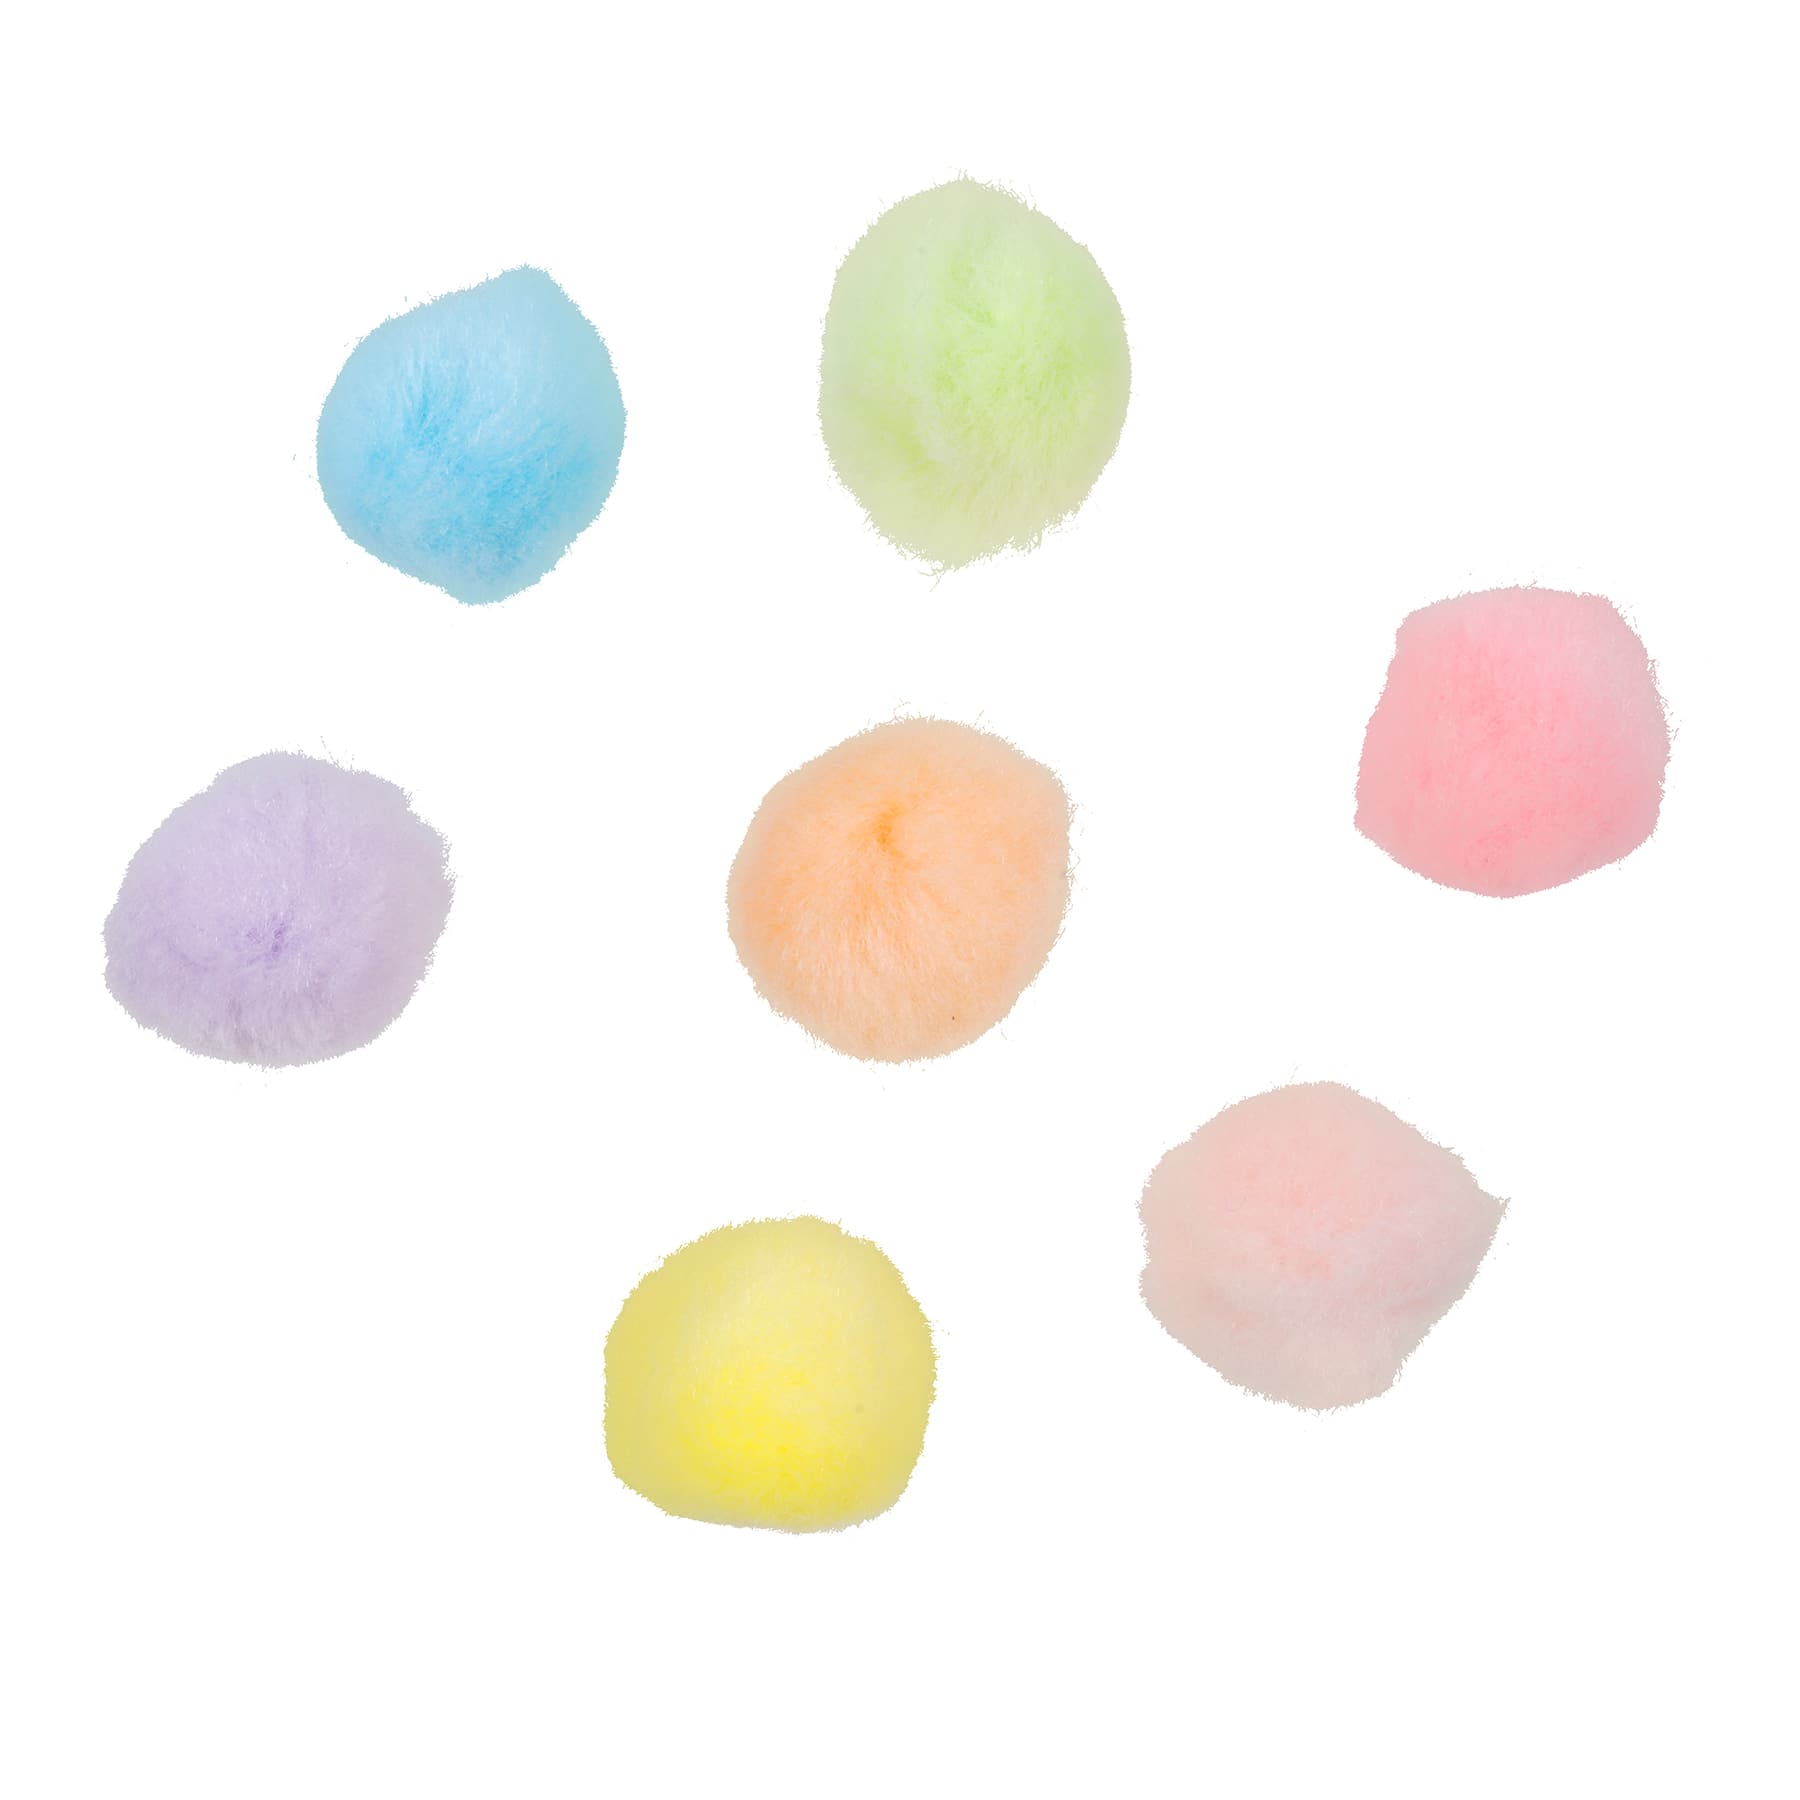 12 Packs: 80 ct. (960 total) 1&#x22; Pastel Pom Poms by Creatology&#x2122;